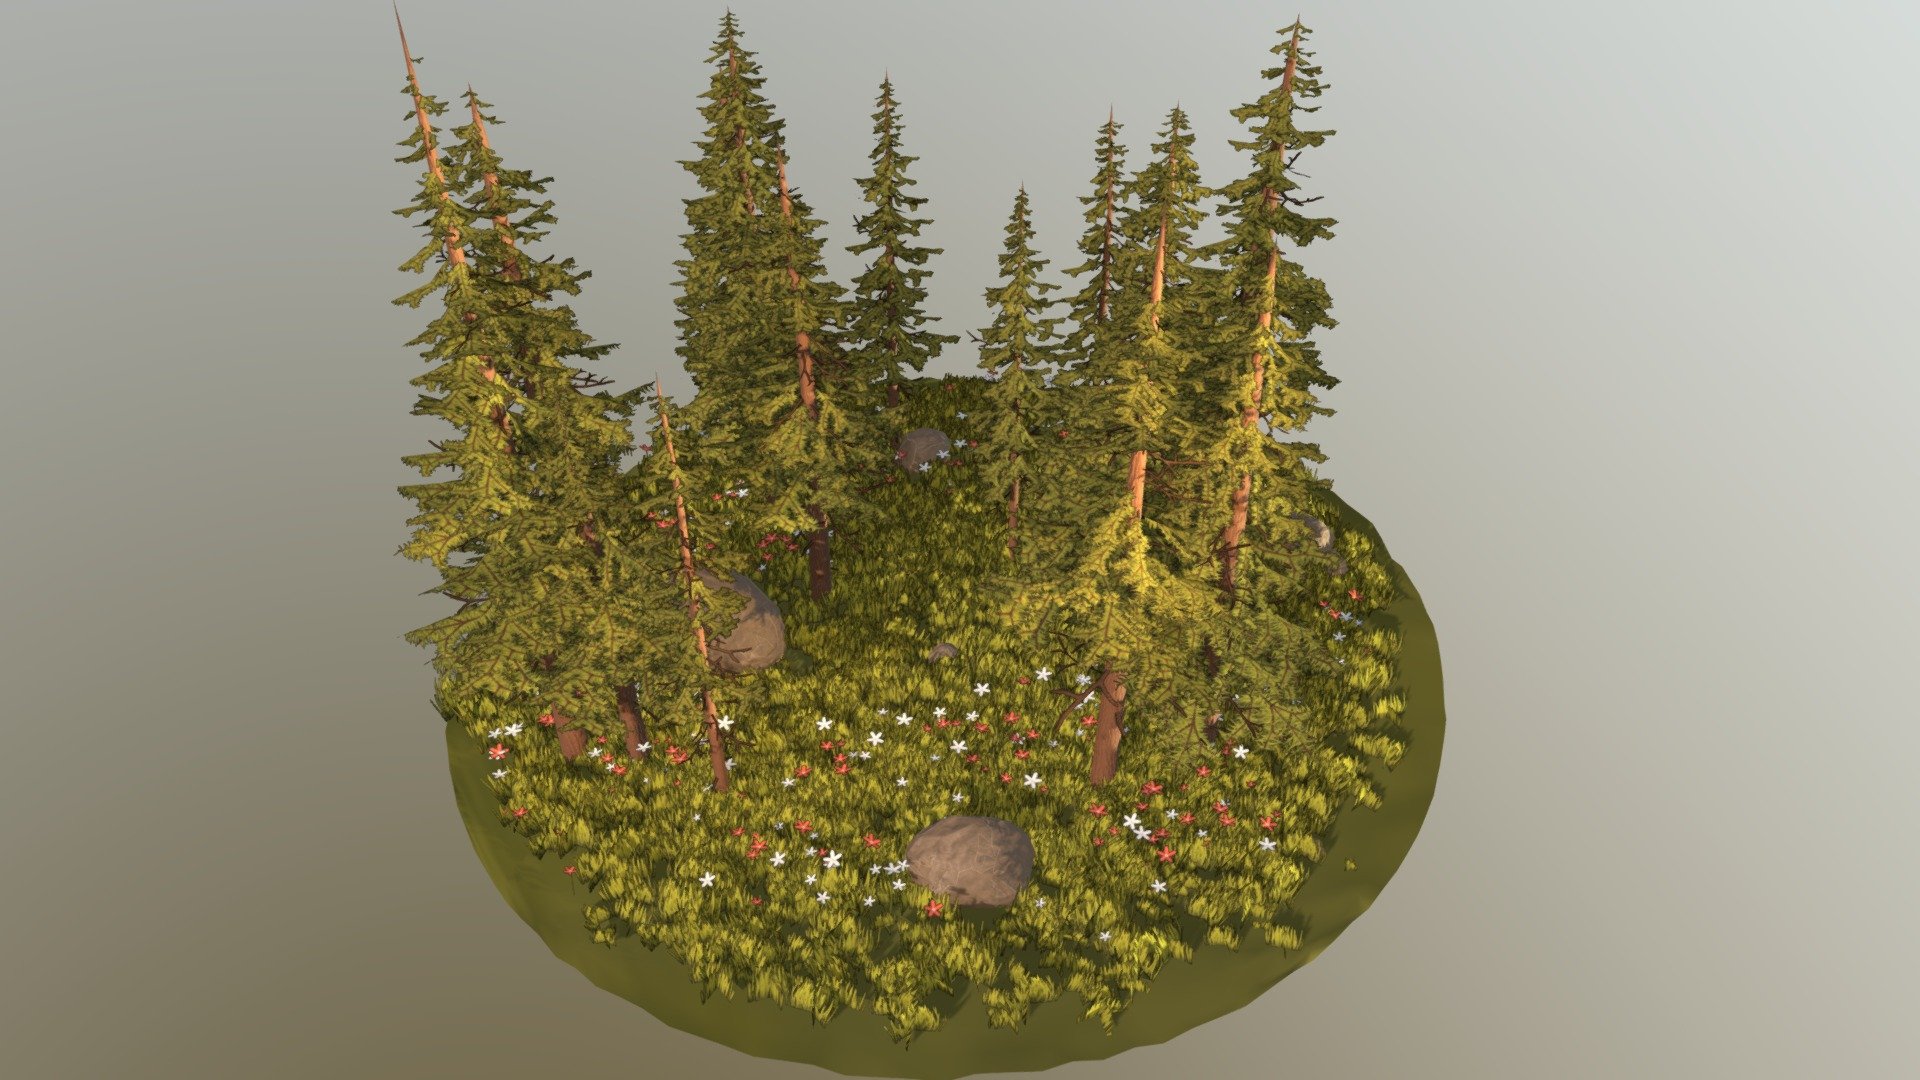 With 20 unique assets you can easily build and populate beautiful stylized environments for your game. This pack contains everything you need to make a beautiful stylized forest scene: trees,flowers, grass, rocks. It’s readily available to import in Unity3D and Ue4. The example scene through included in the package.





Package contains:

8 Pine Trees (Verts 1700, Faces 1000)

5 Rocks Verts (500, Faces 980)

4 Flowers, 4 Grass (Verts 18, Faces 8)

pbr textures 2048x2048 png Winter, Summer - Seasonal Pine Trees And Rocks Pack - 3D model by Crazy_8 (@korboleevd) 3d model